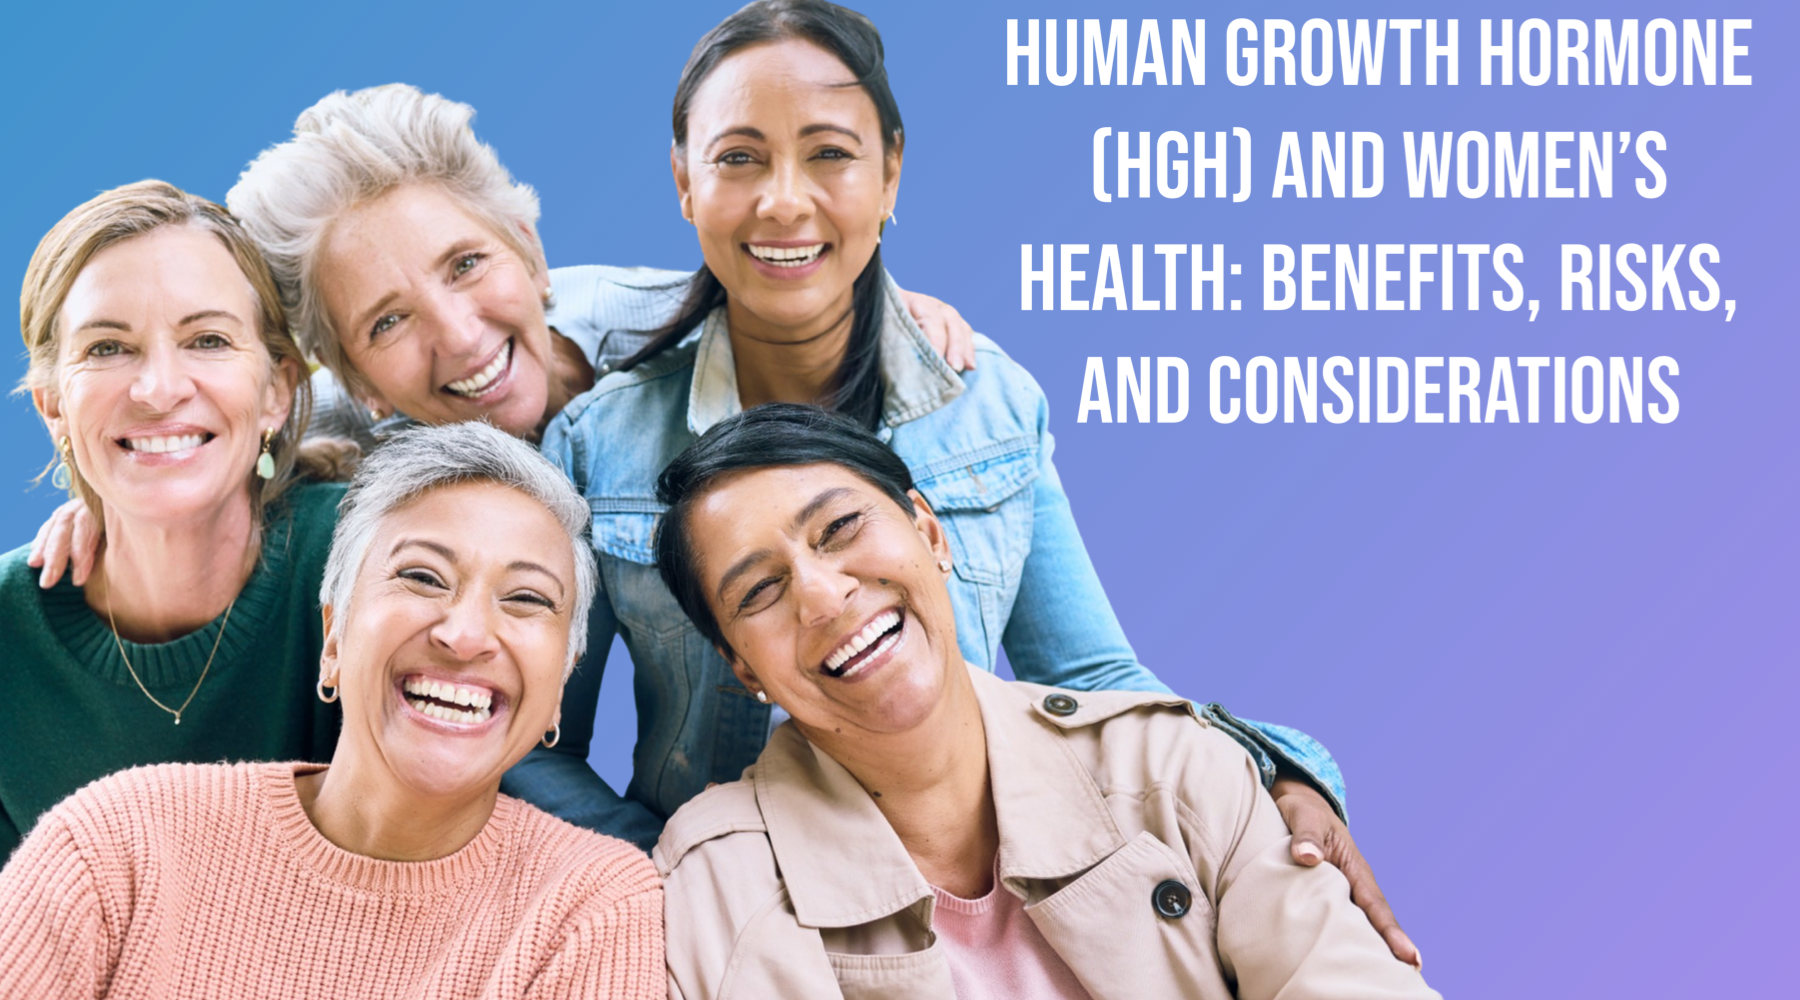 Human Growth Hormone (HGH) and Women’s Health: Benefits, Risks, and Considerations